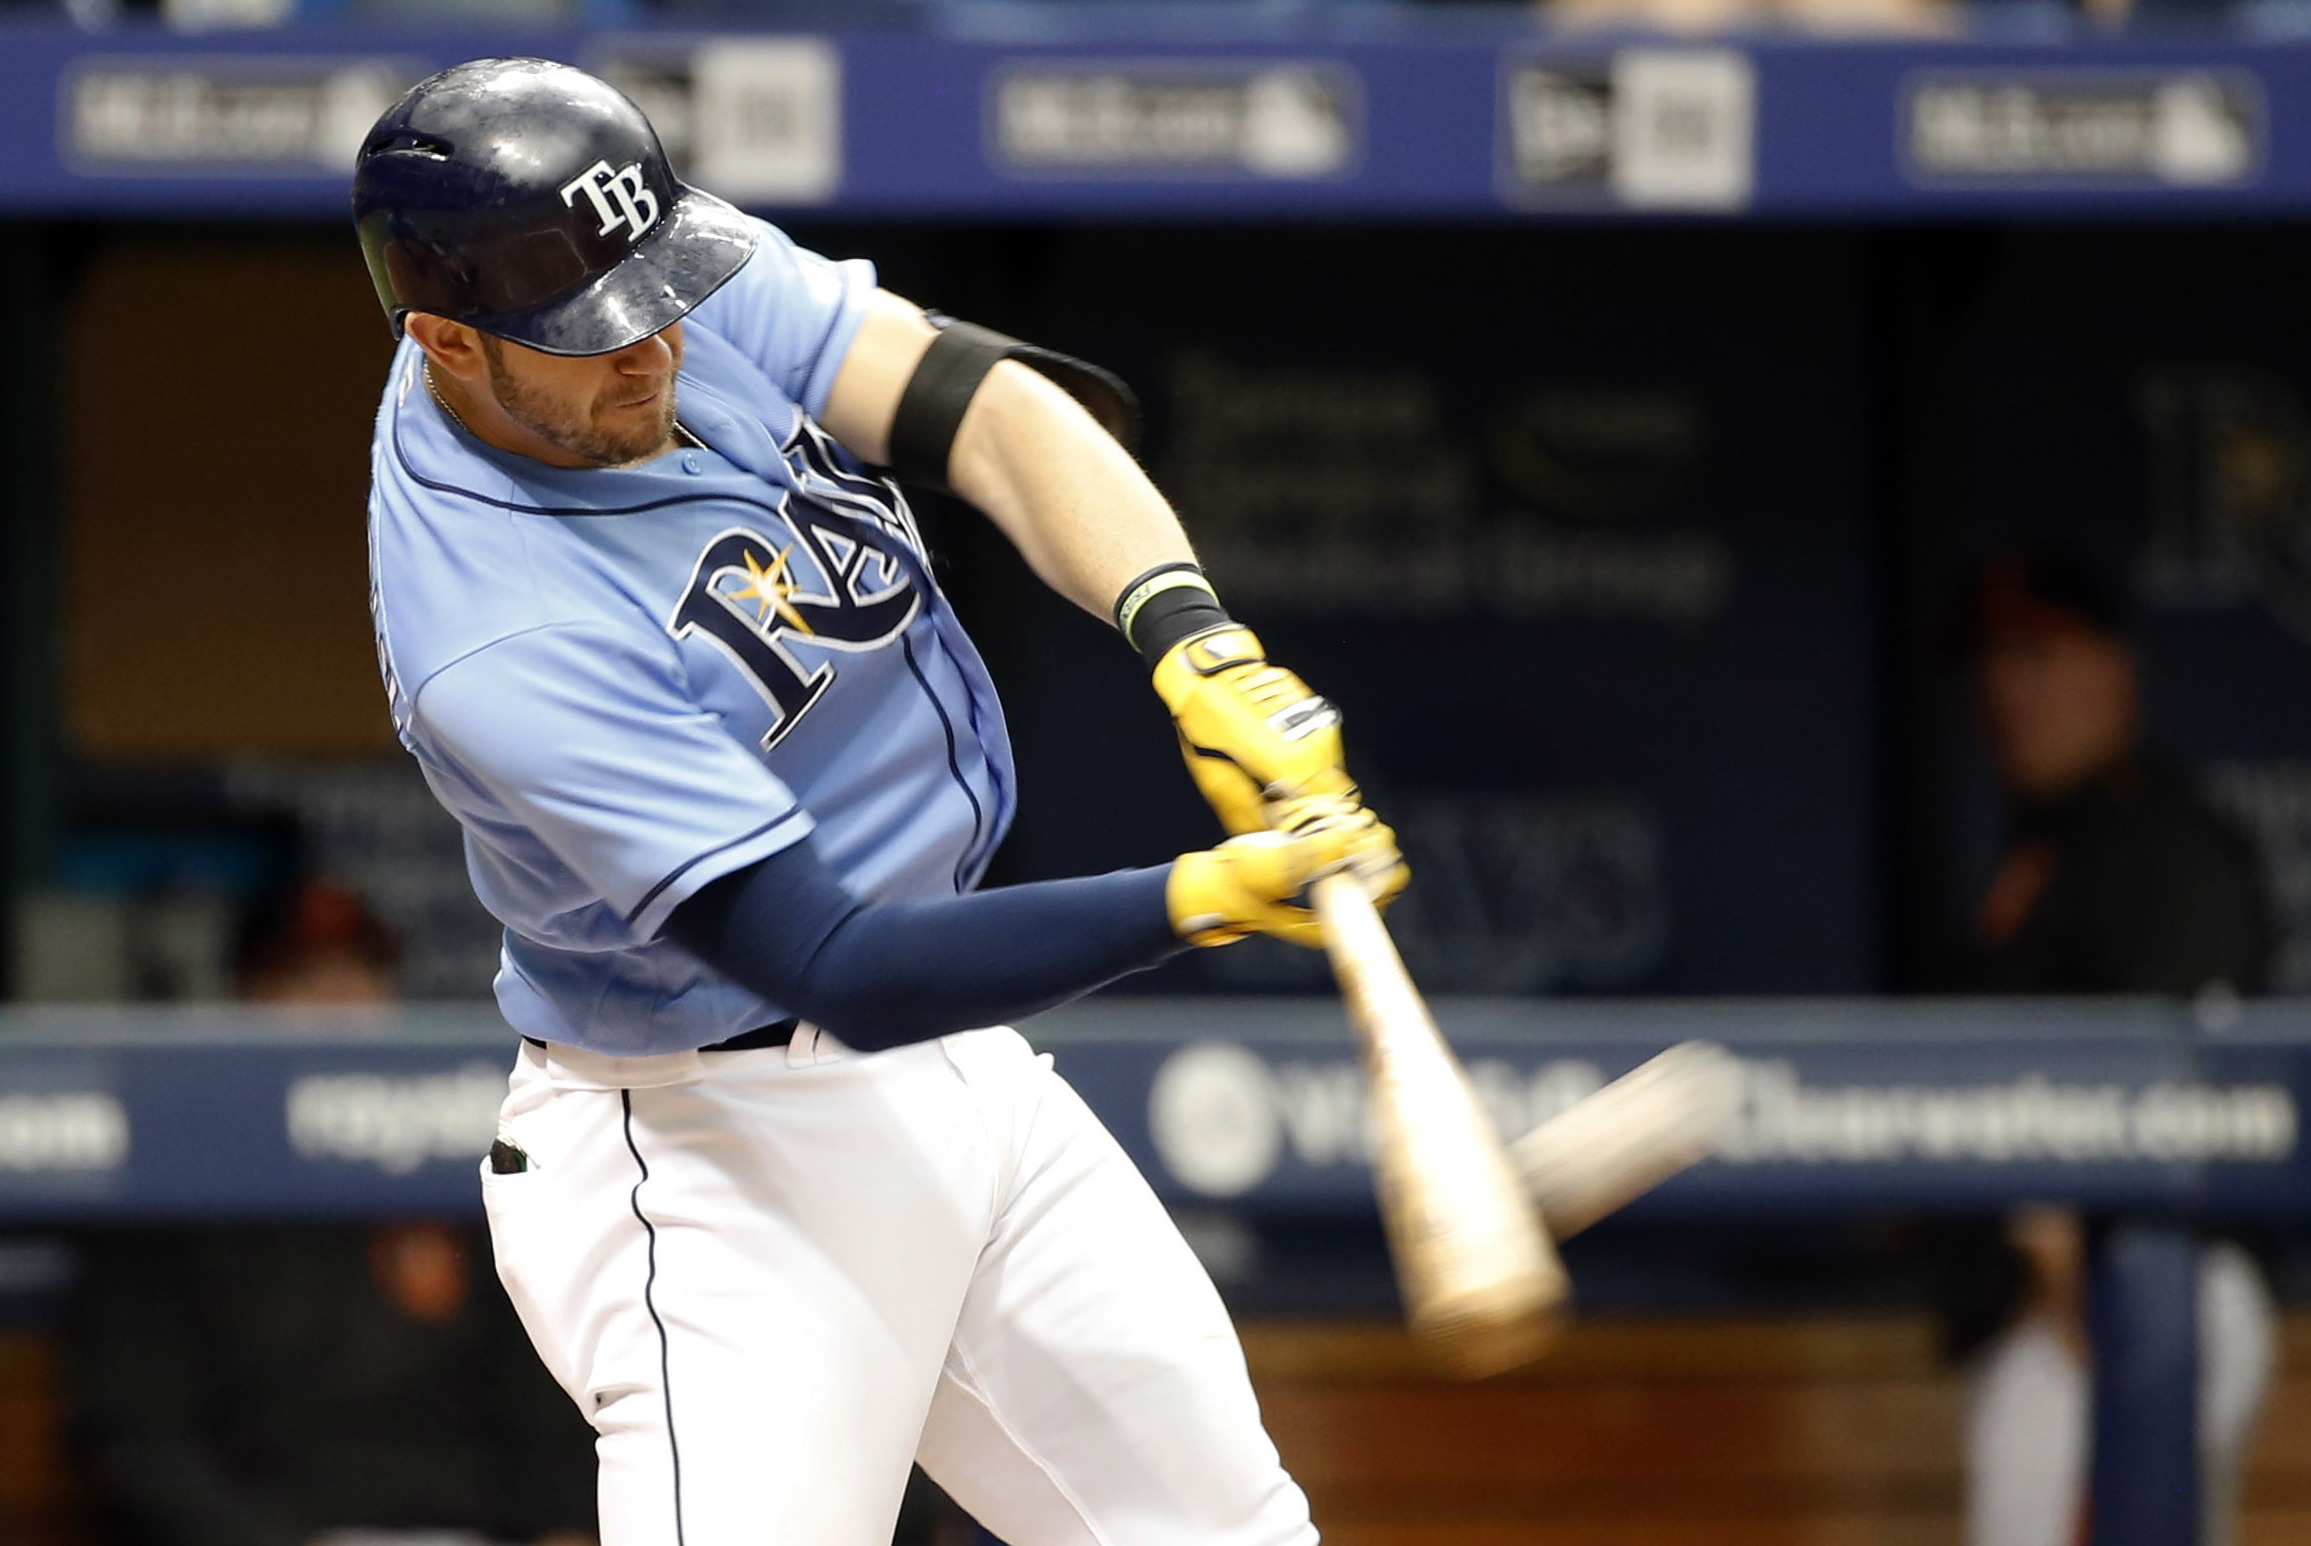 August 1, 2017: Evan Longoria hits for the cycle as replay review reverses  ruling – Society for American Baseball Research